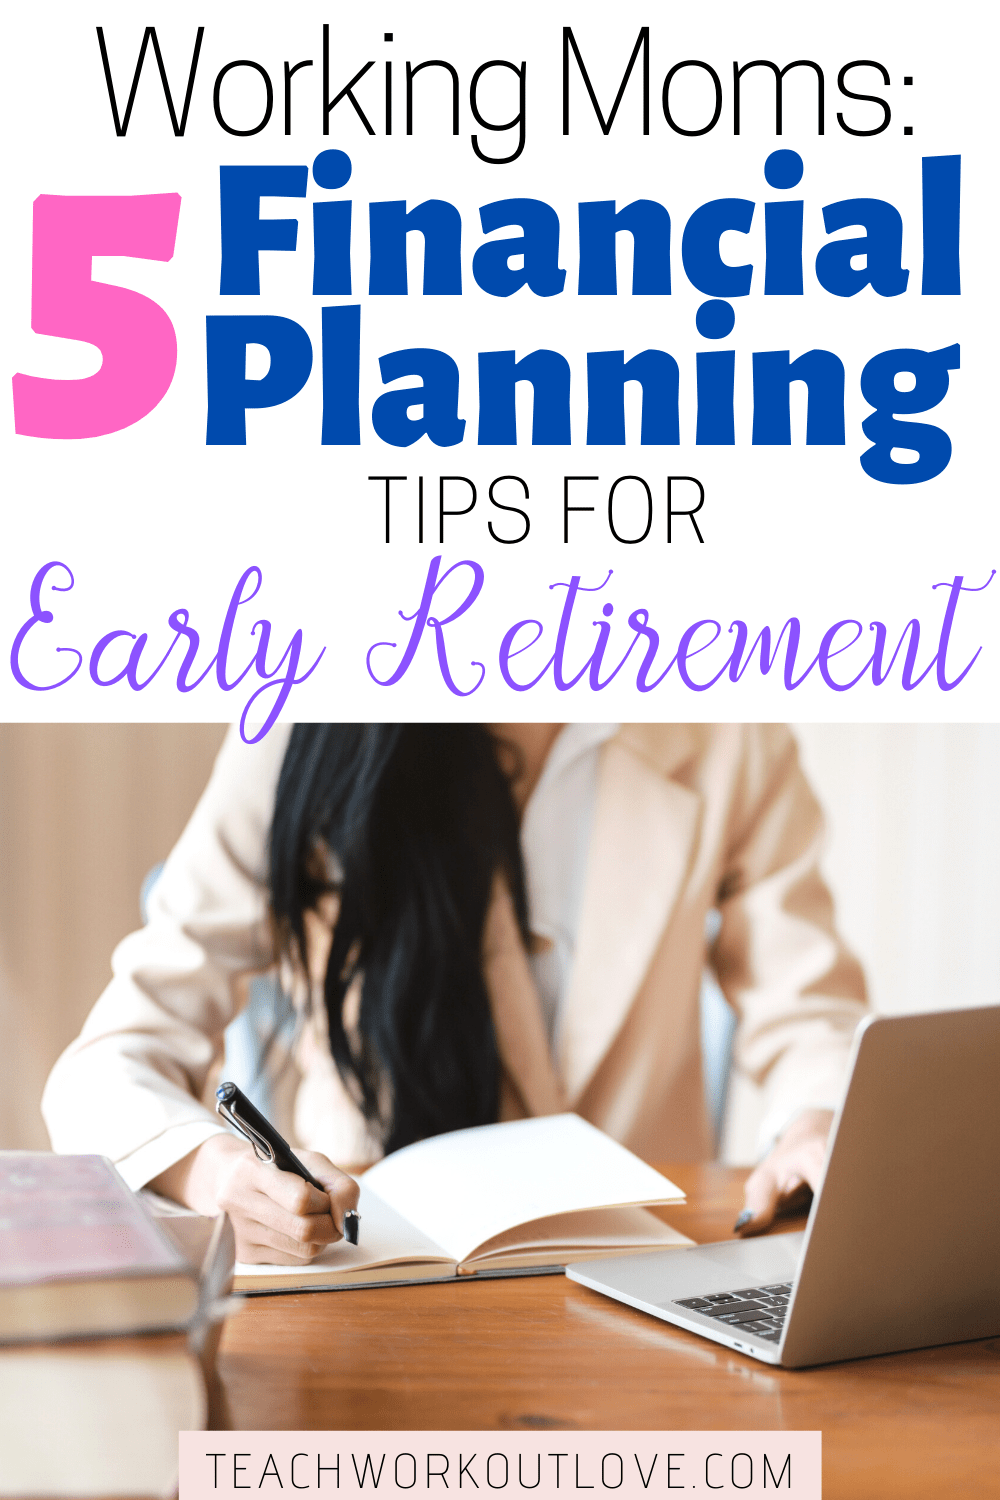 Retirement is something we all work toward, but it's difficult to figure out when & how to do it. Here are five financial planning tips for working moms.